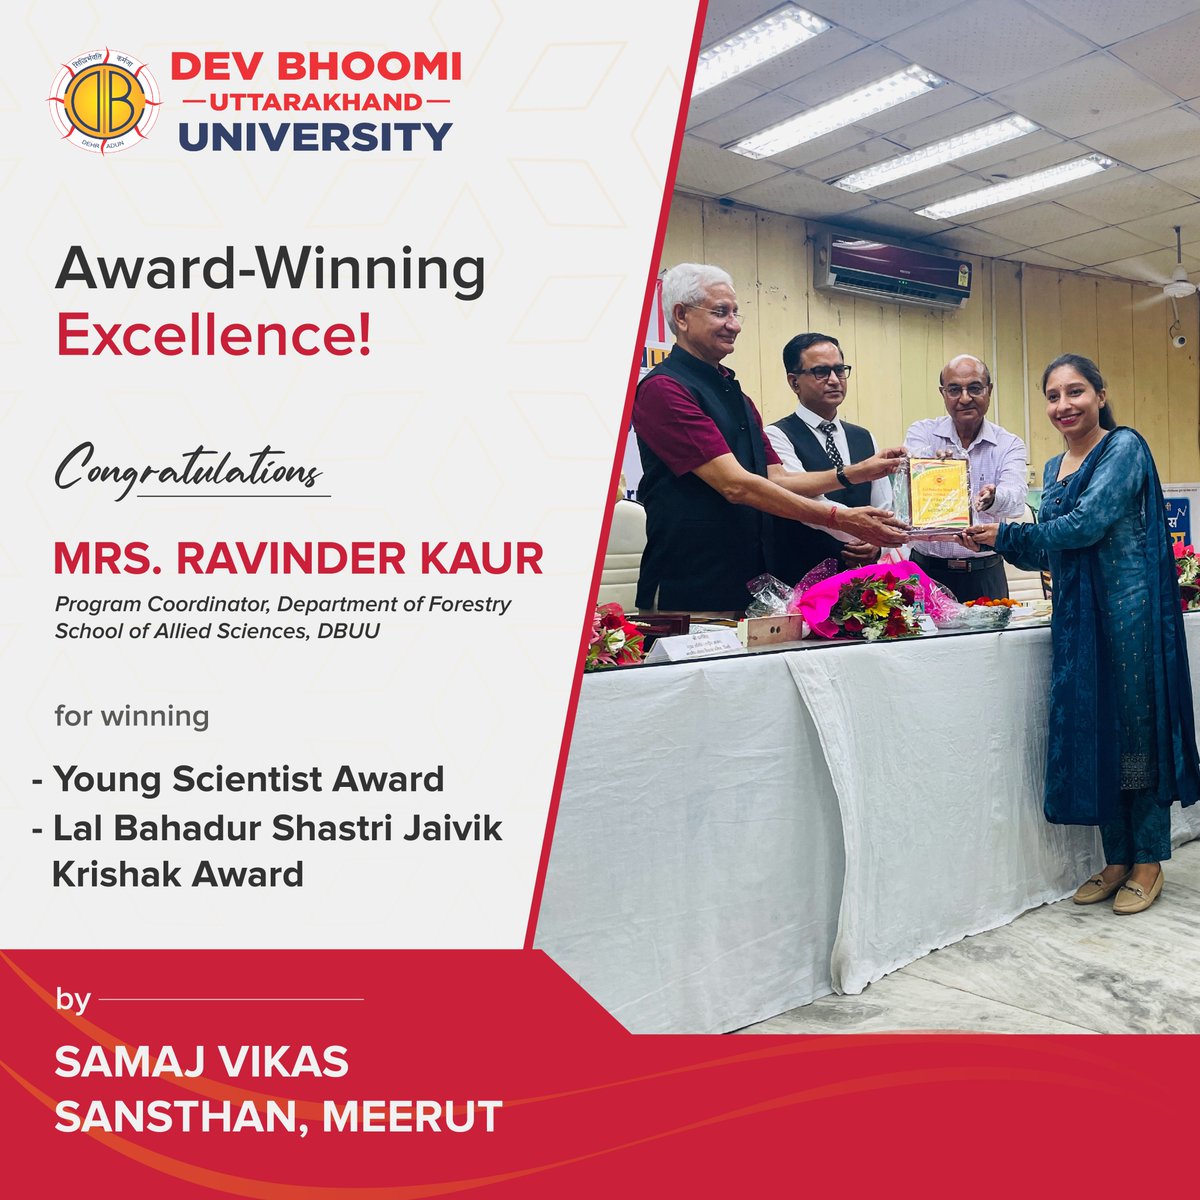 #ProudMoment!

#Congratulations to Mrs. Ravinder Kaur, Program Coordinator at the Department of Forestry, School of #AlliedSciences, DBUU, for receiving 

1️ Young Scientist Award
2️ Lal Bahadur Shastri Jaivik Krishak Award

Join us in celebrating her dedication.